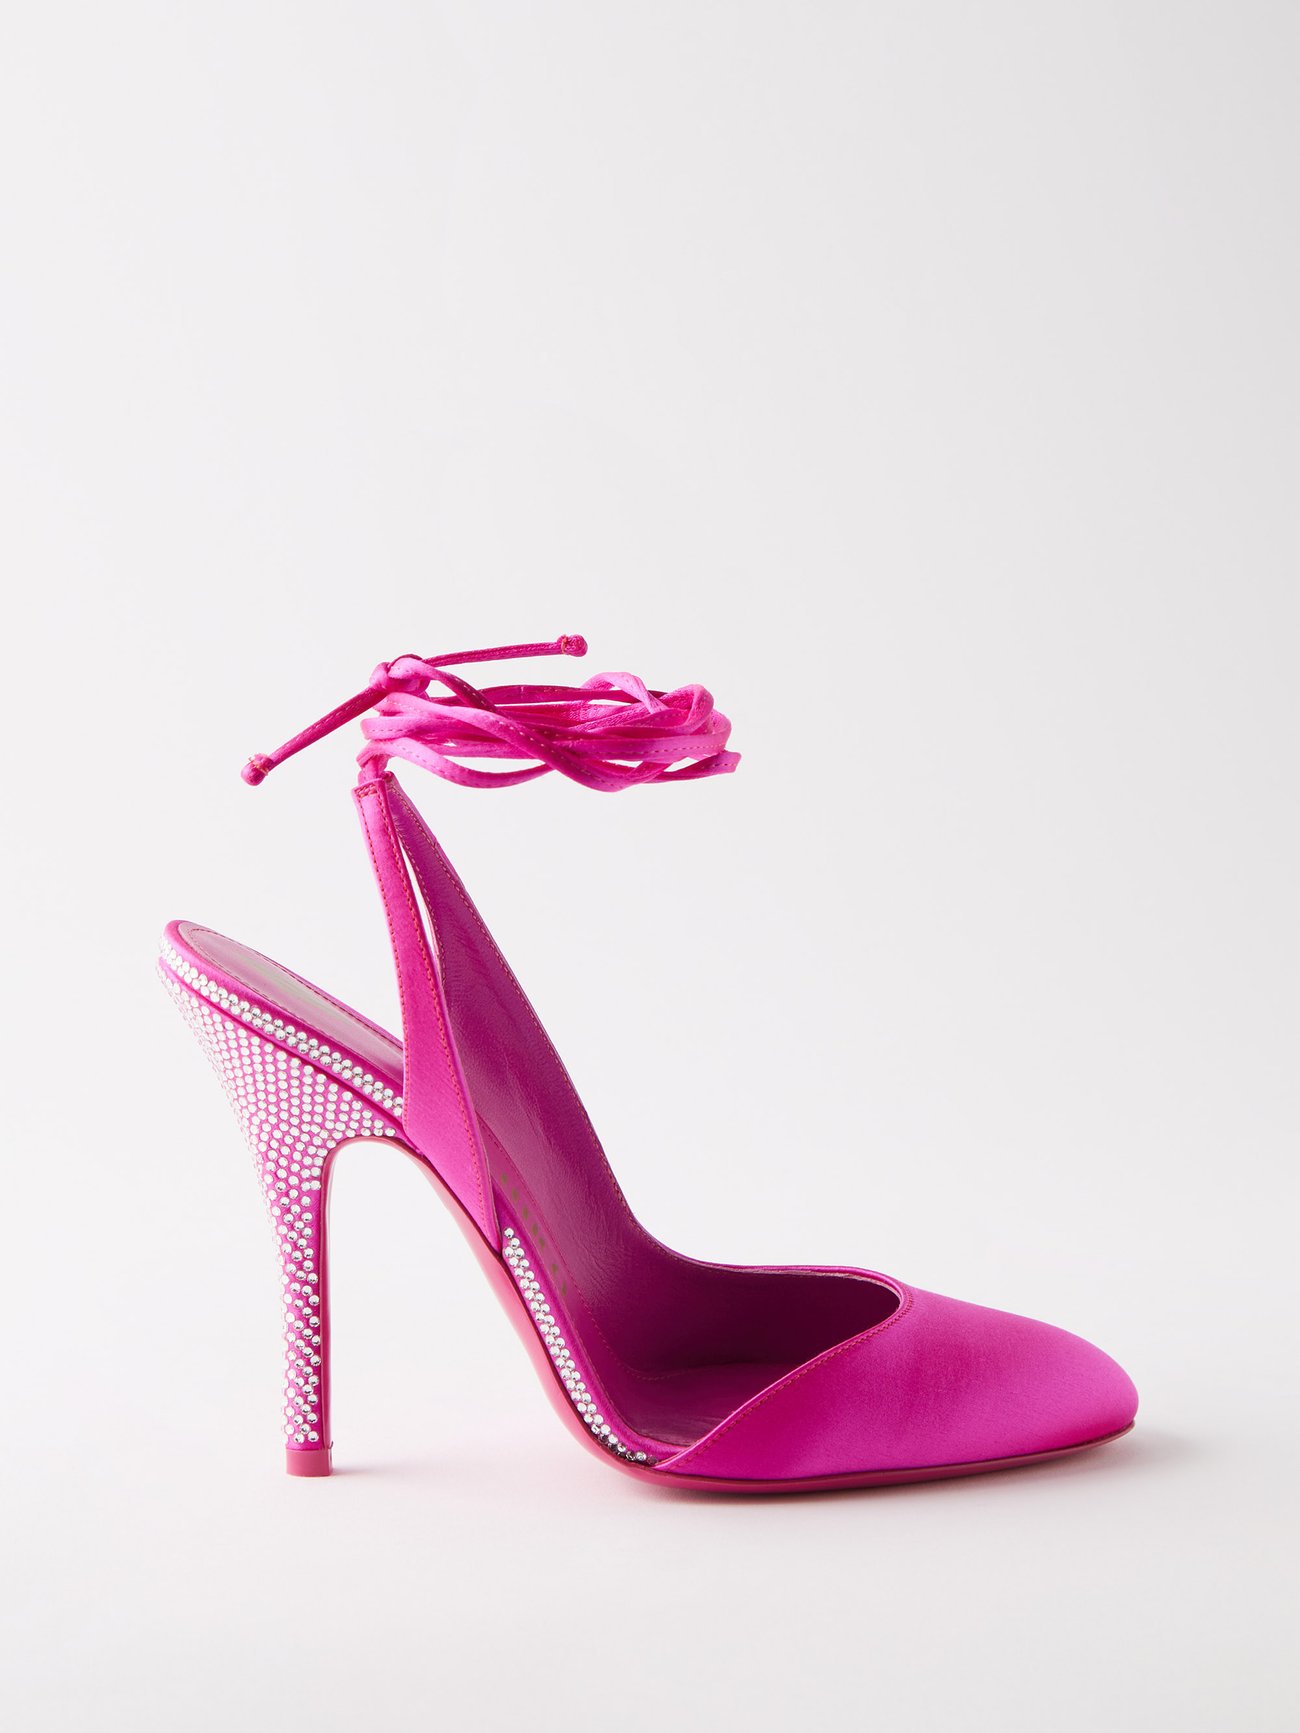 The Attico Carrie 105 crystal-embellished slingback pumps